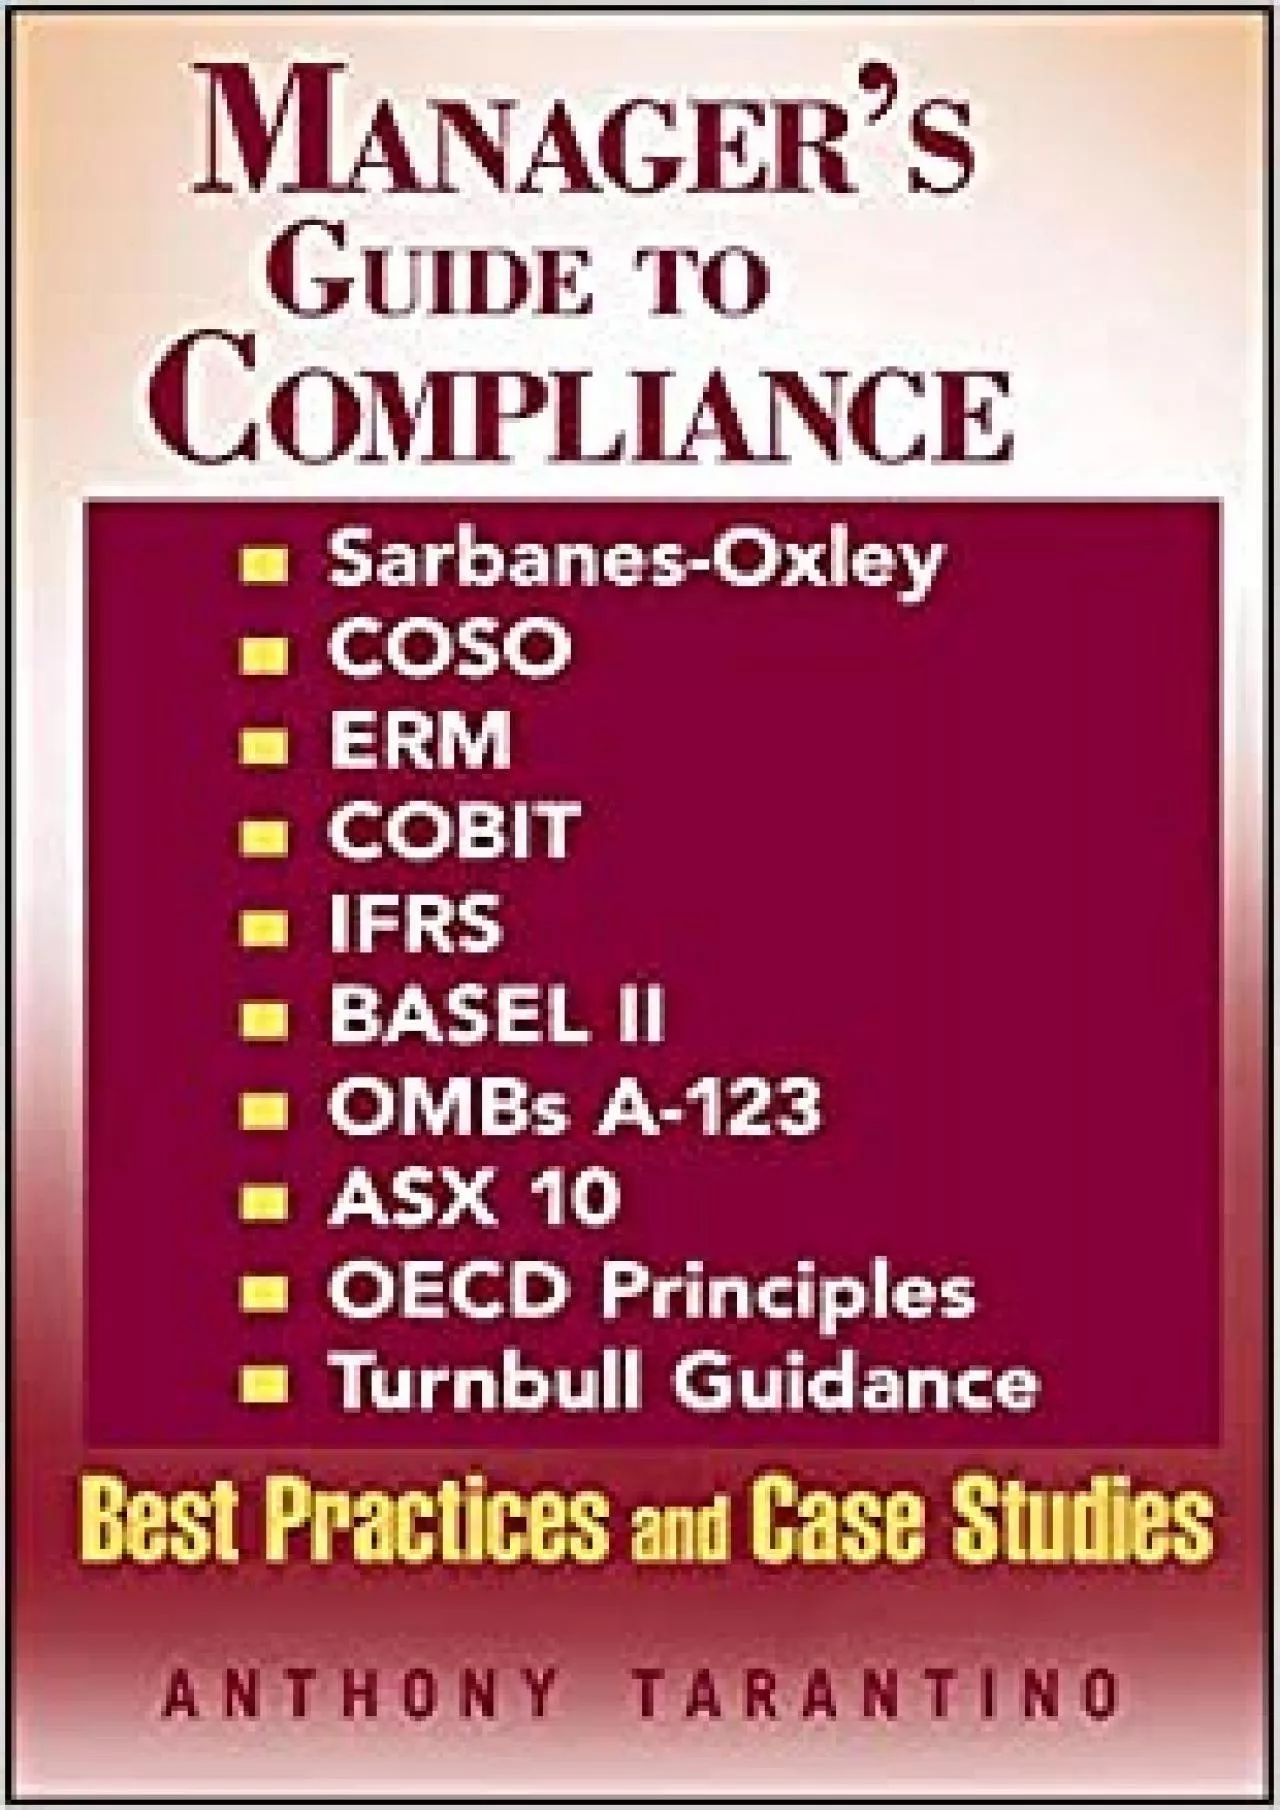 Manager\'s Guide to Compliance: Sarbanes-Oxley COSO ERM COBIT IFRS BASEL II OMB\'s A-123